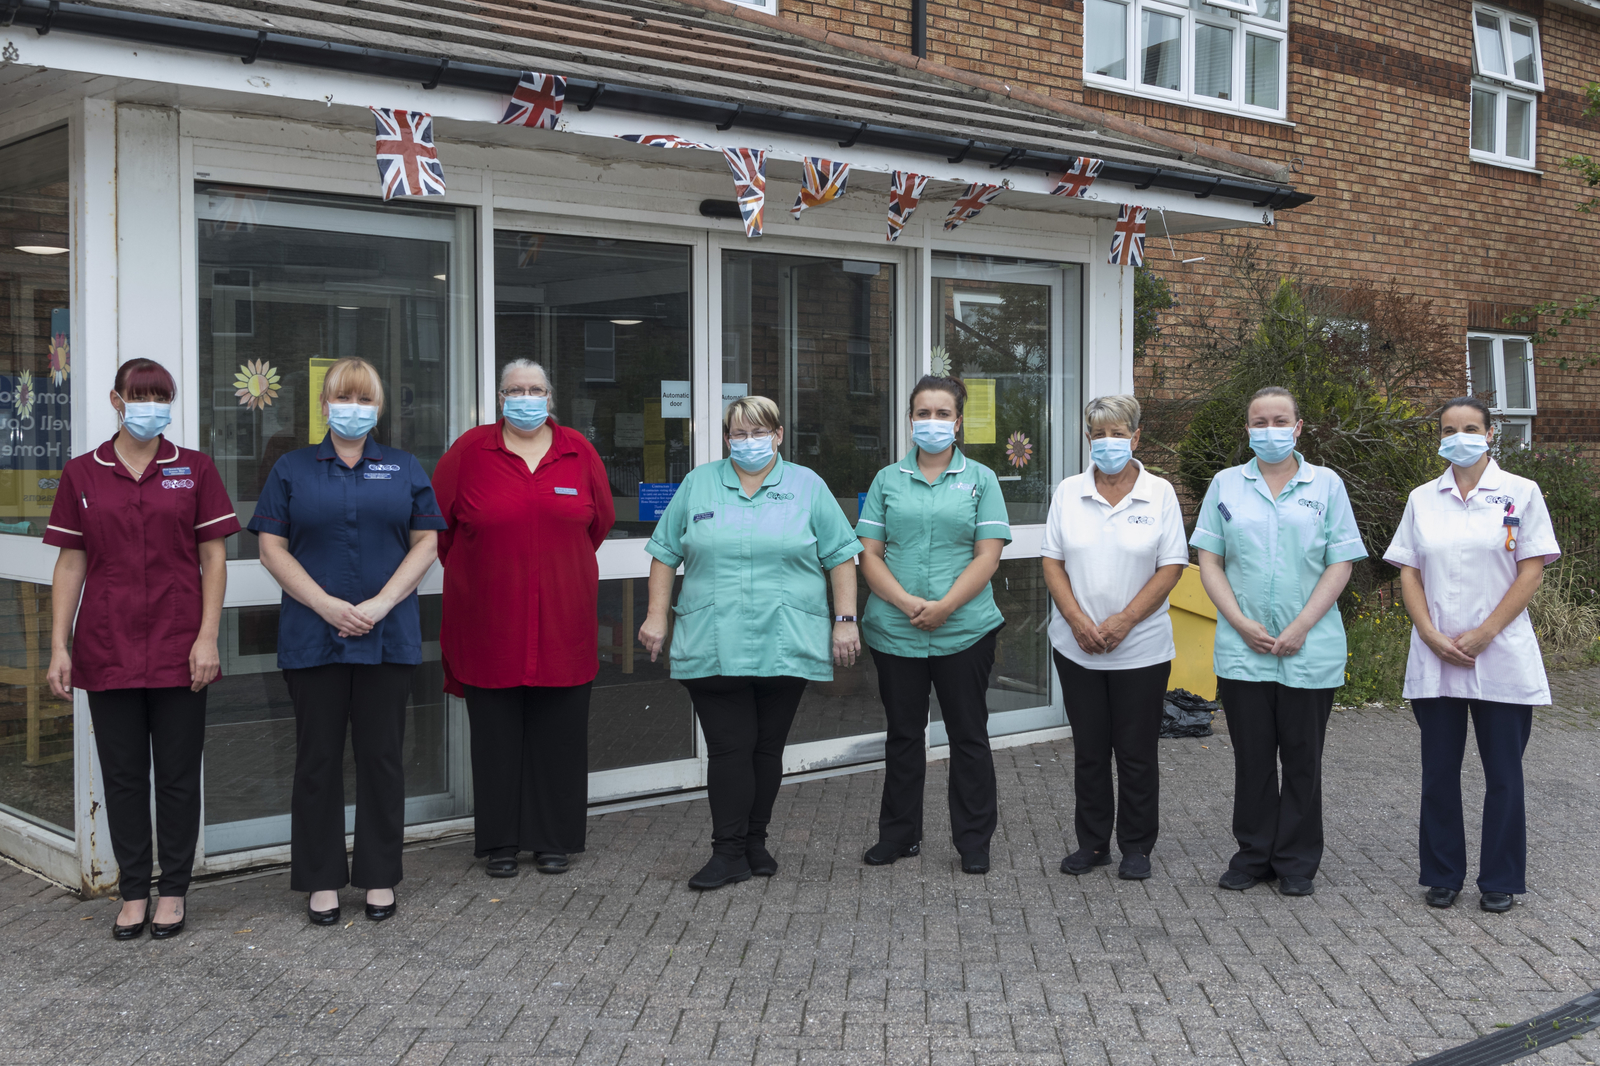 15 June 2020: Brockwell Court Care Home staff in Consett